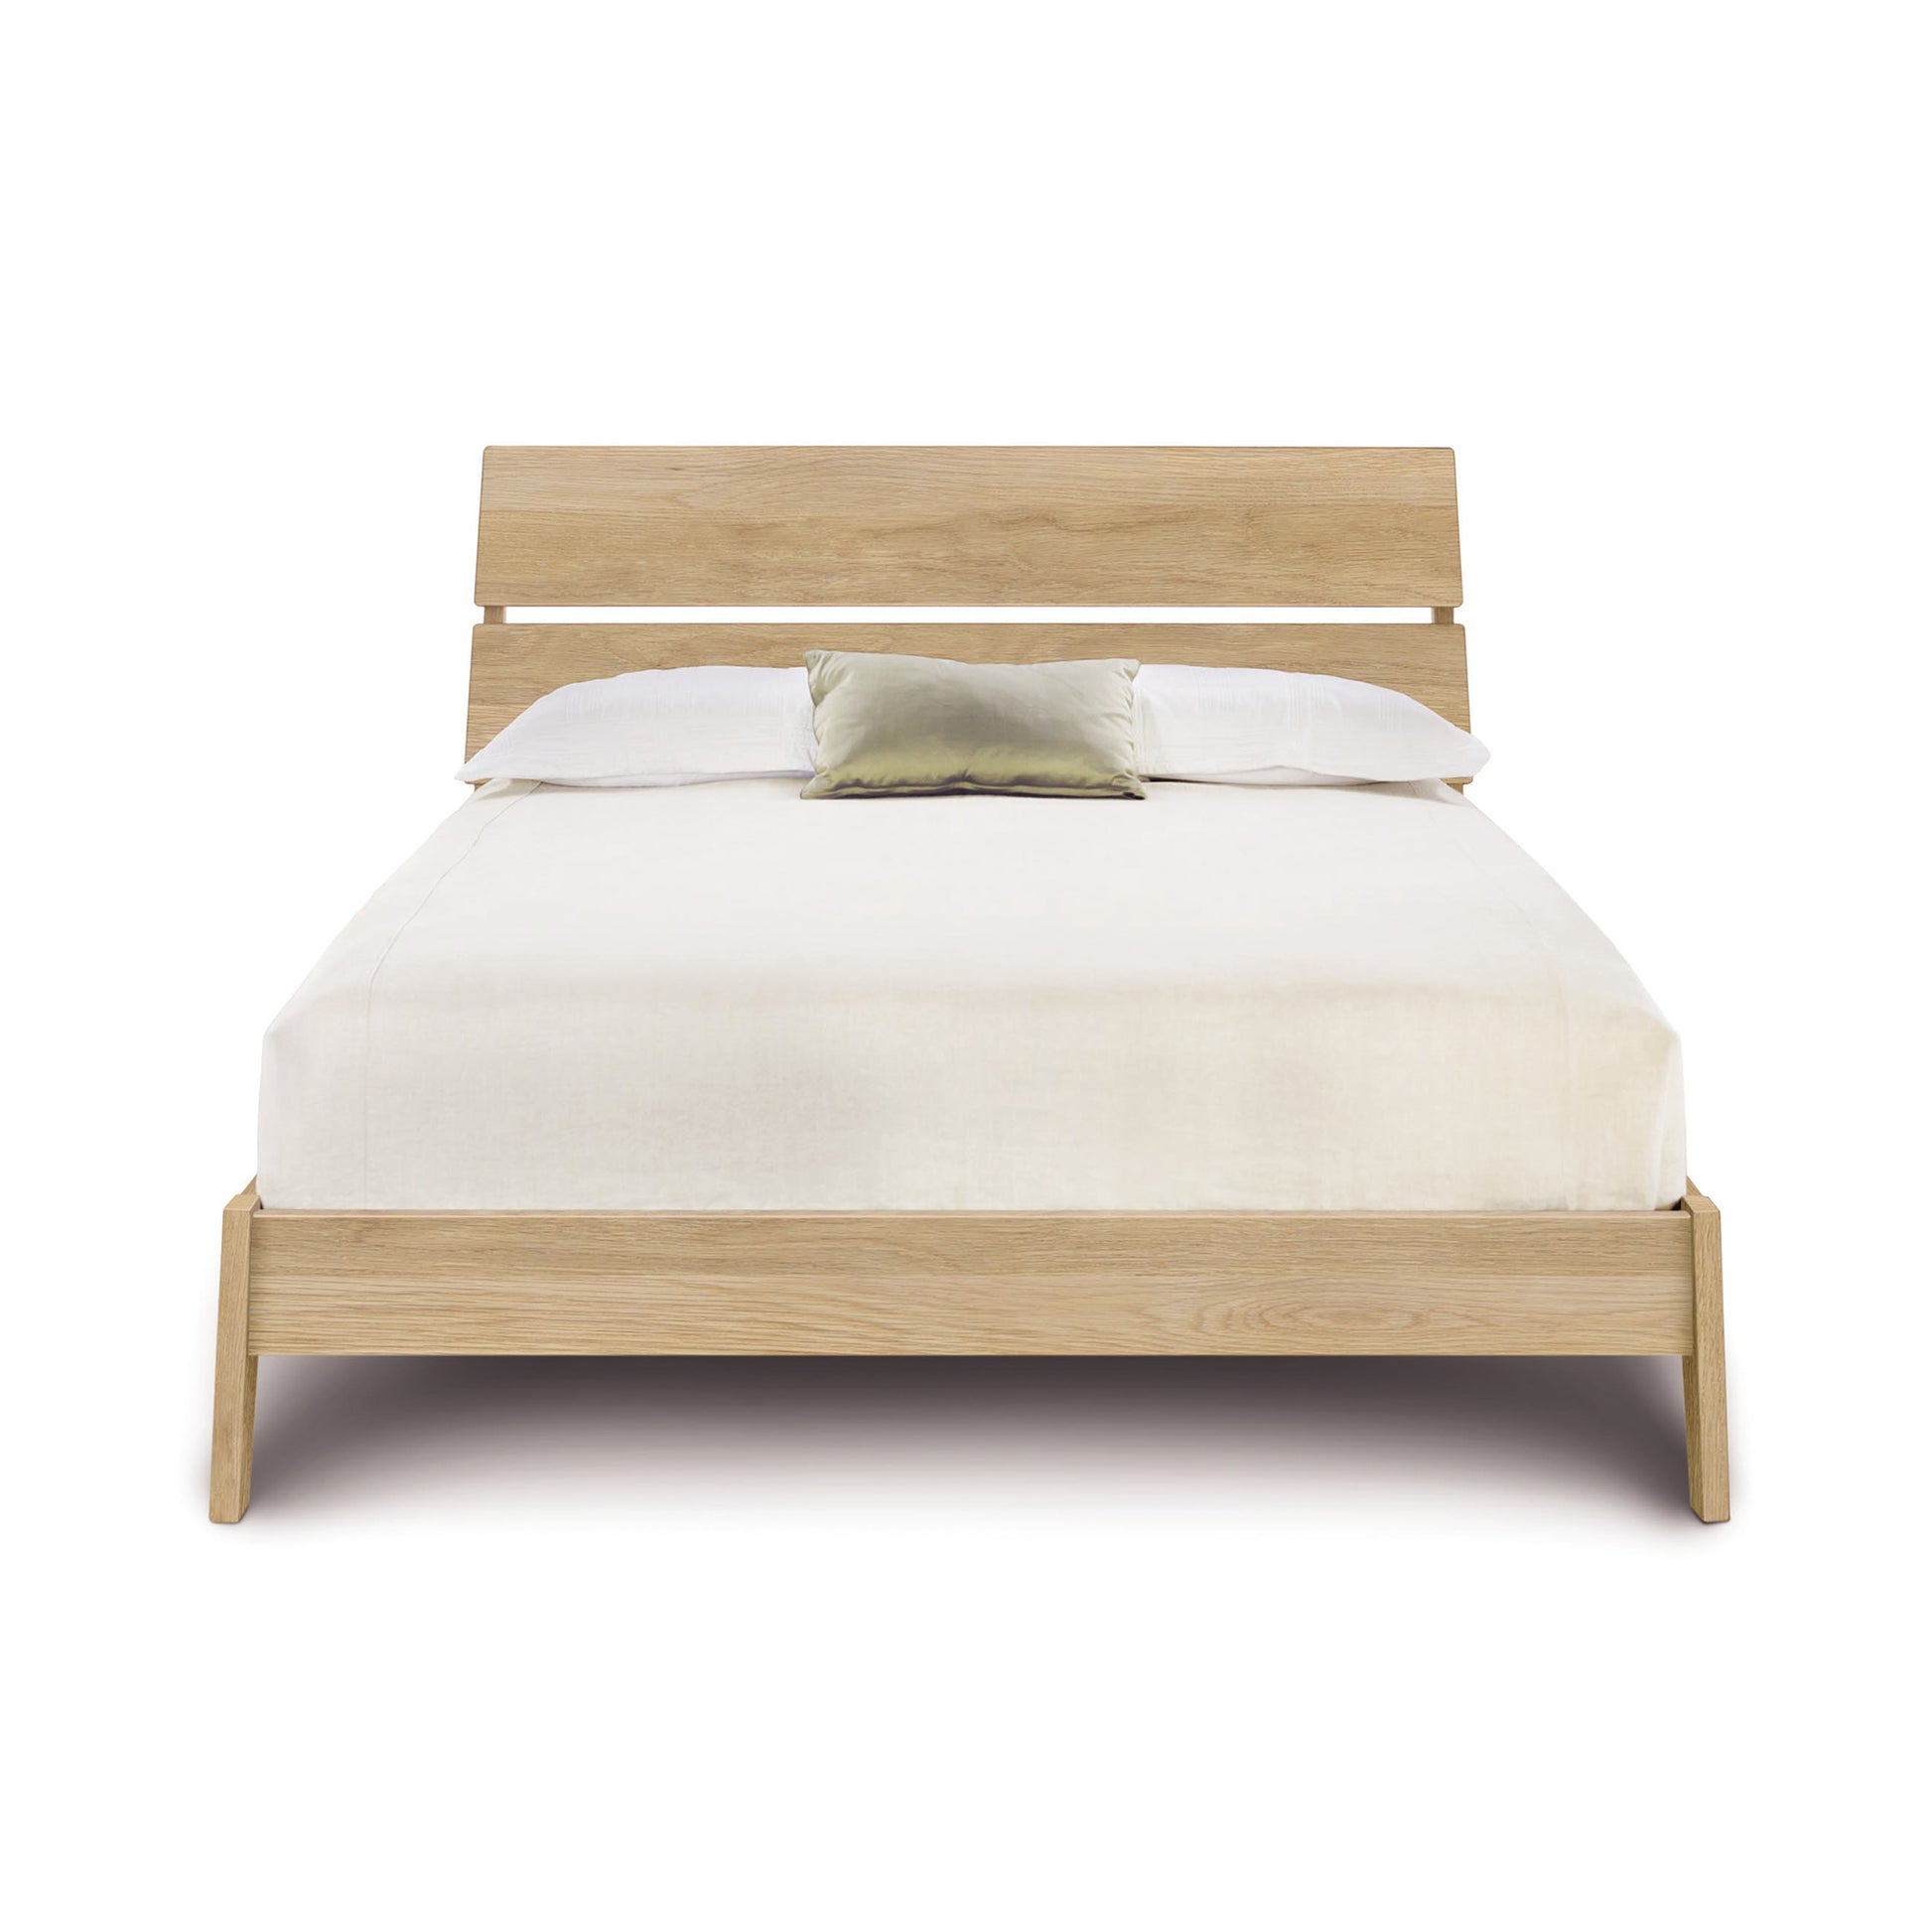 A Copeland Furniture Linn Oak Platform Bed with a headboard, dressed in white bedding and a pair of pillows, isolated on a white background.